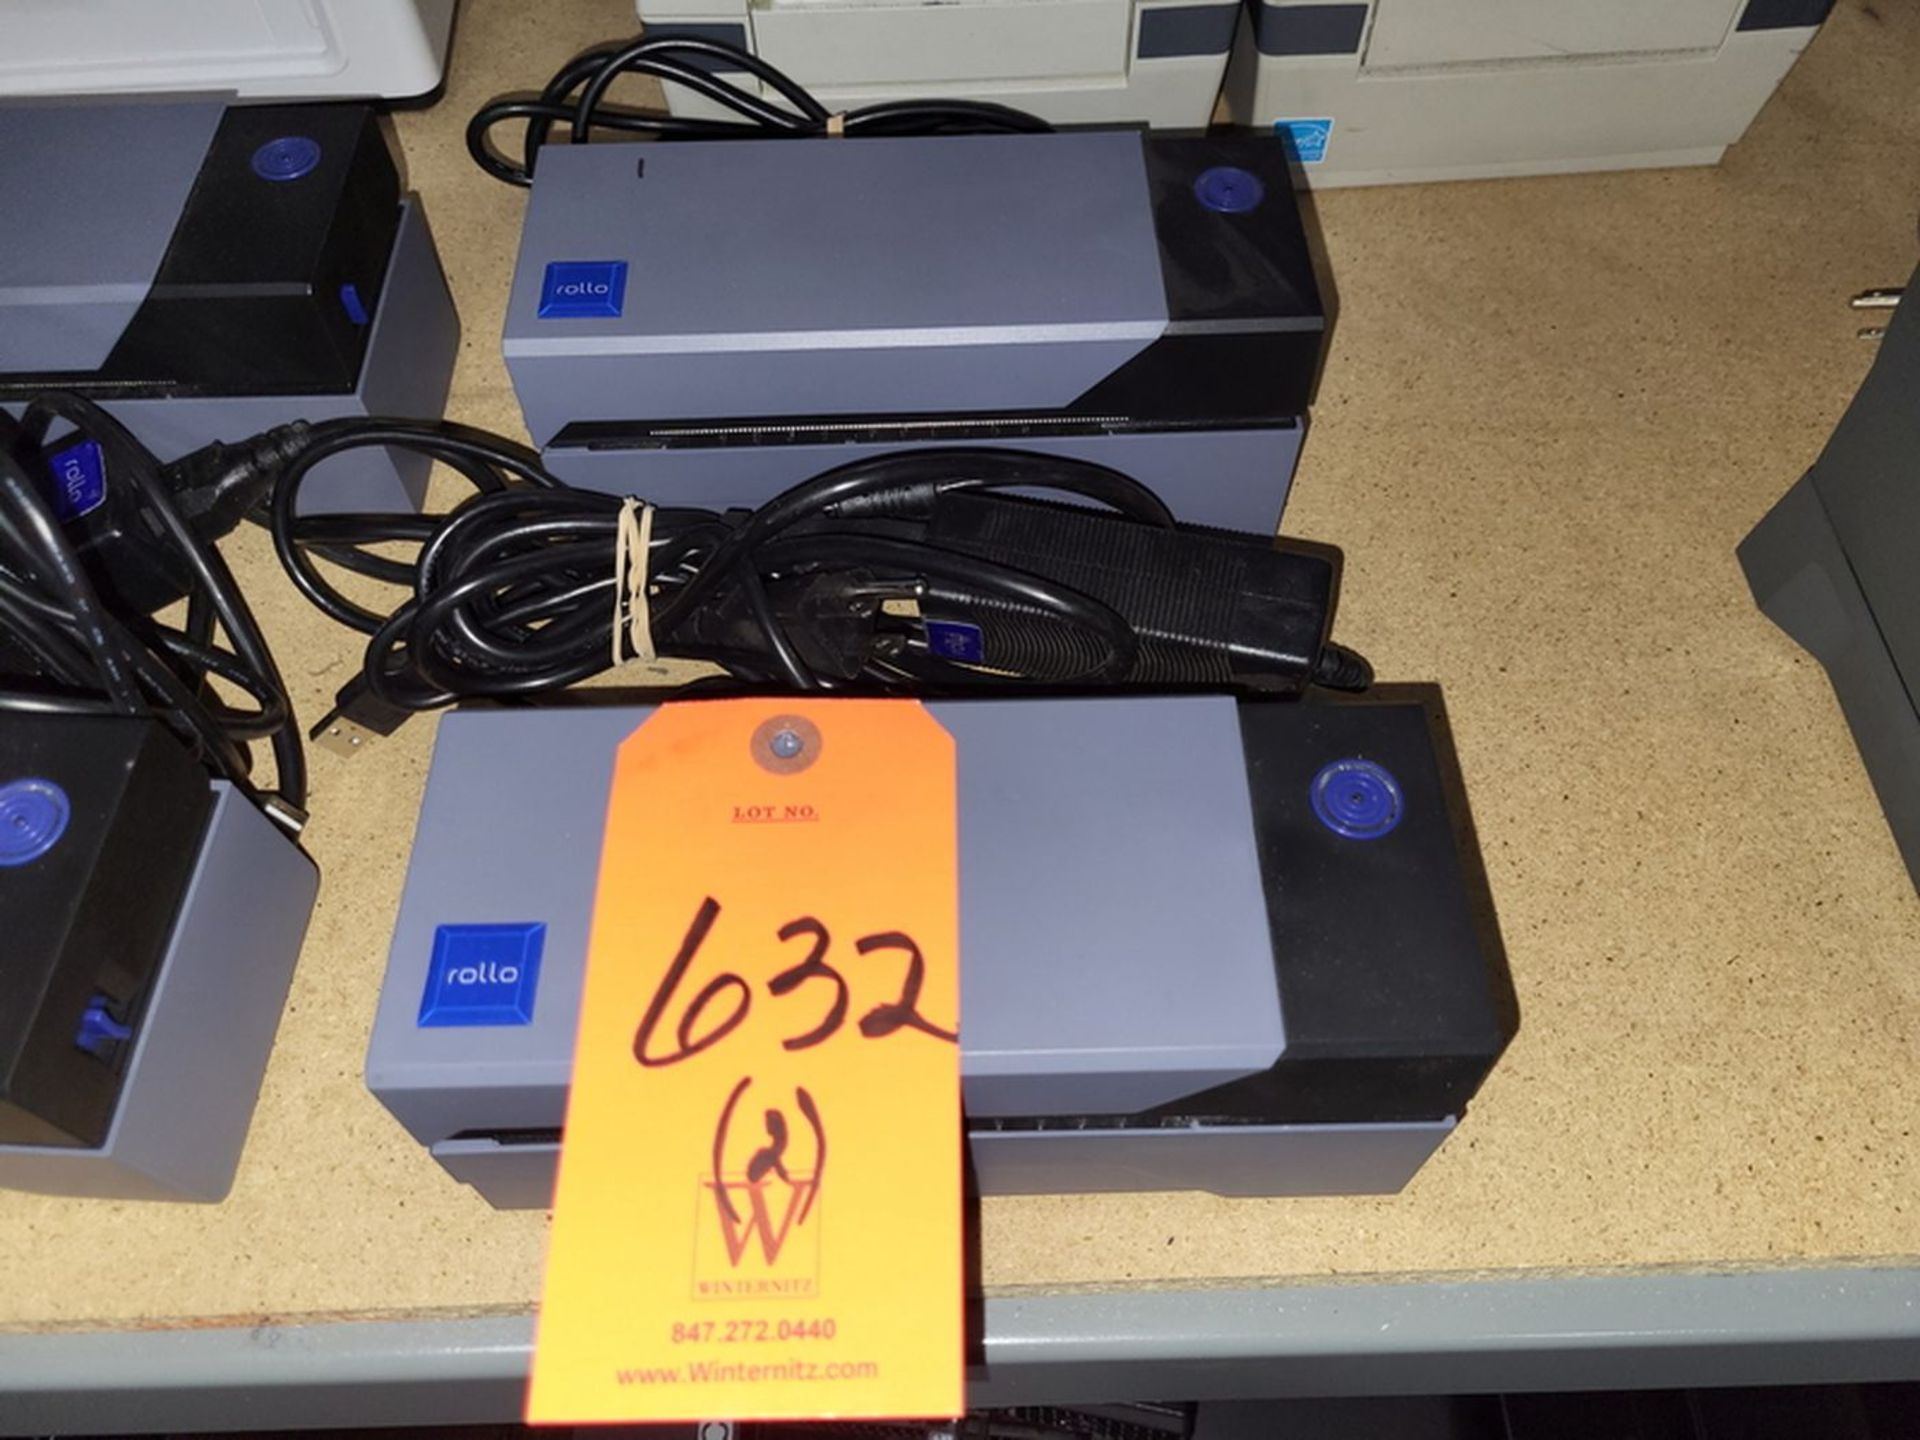 Lot - (2) Rollo X1038 Thermal Printers; with AC Power Adapters